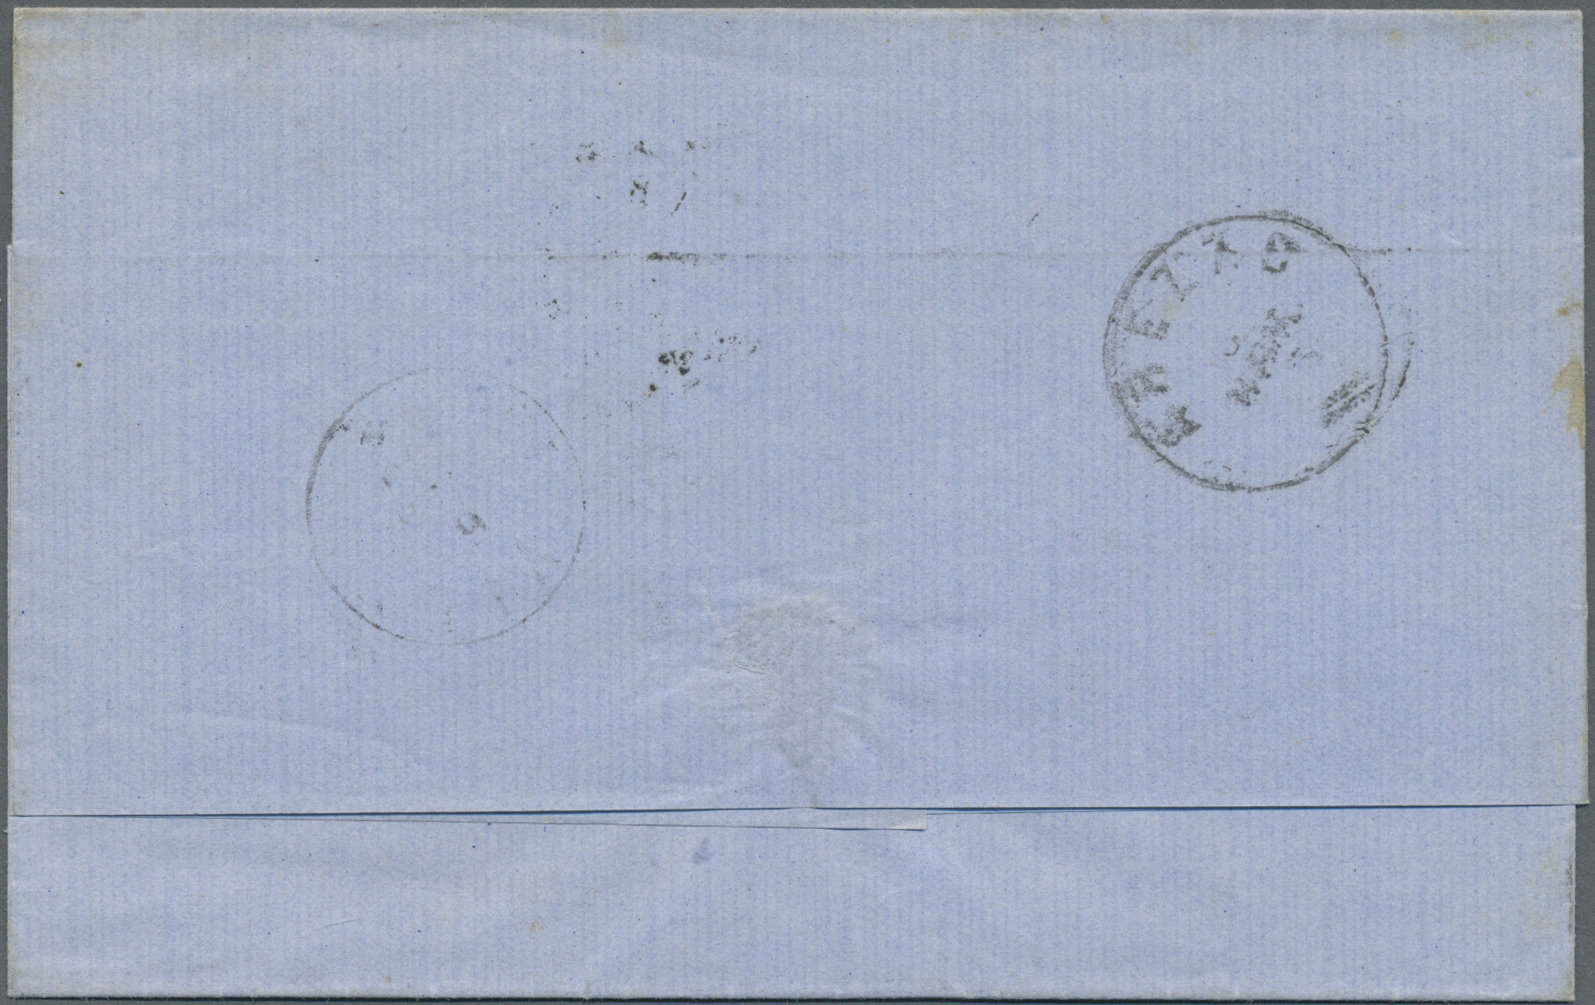 Br/ Italien: 1863, 15 C Blue "Tipo Sardo", Single Franking On Folded Letter Cover From FIRENZE, 1 GEN 1863, To Bib - Marcophilie